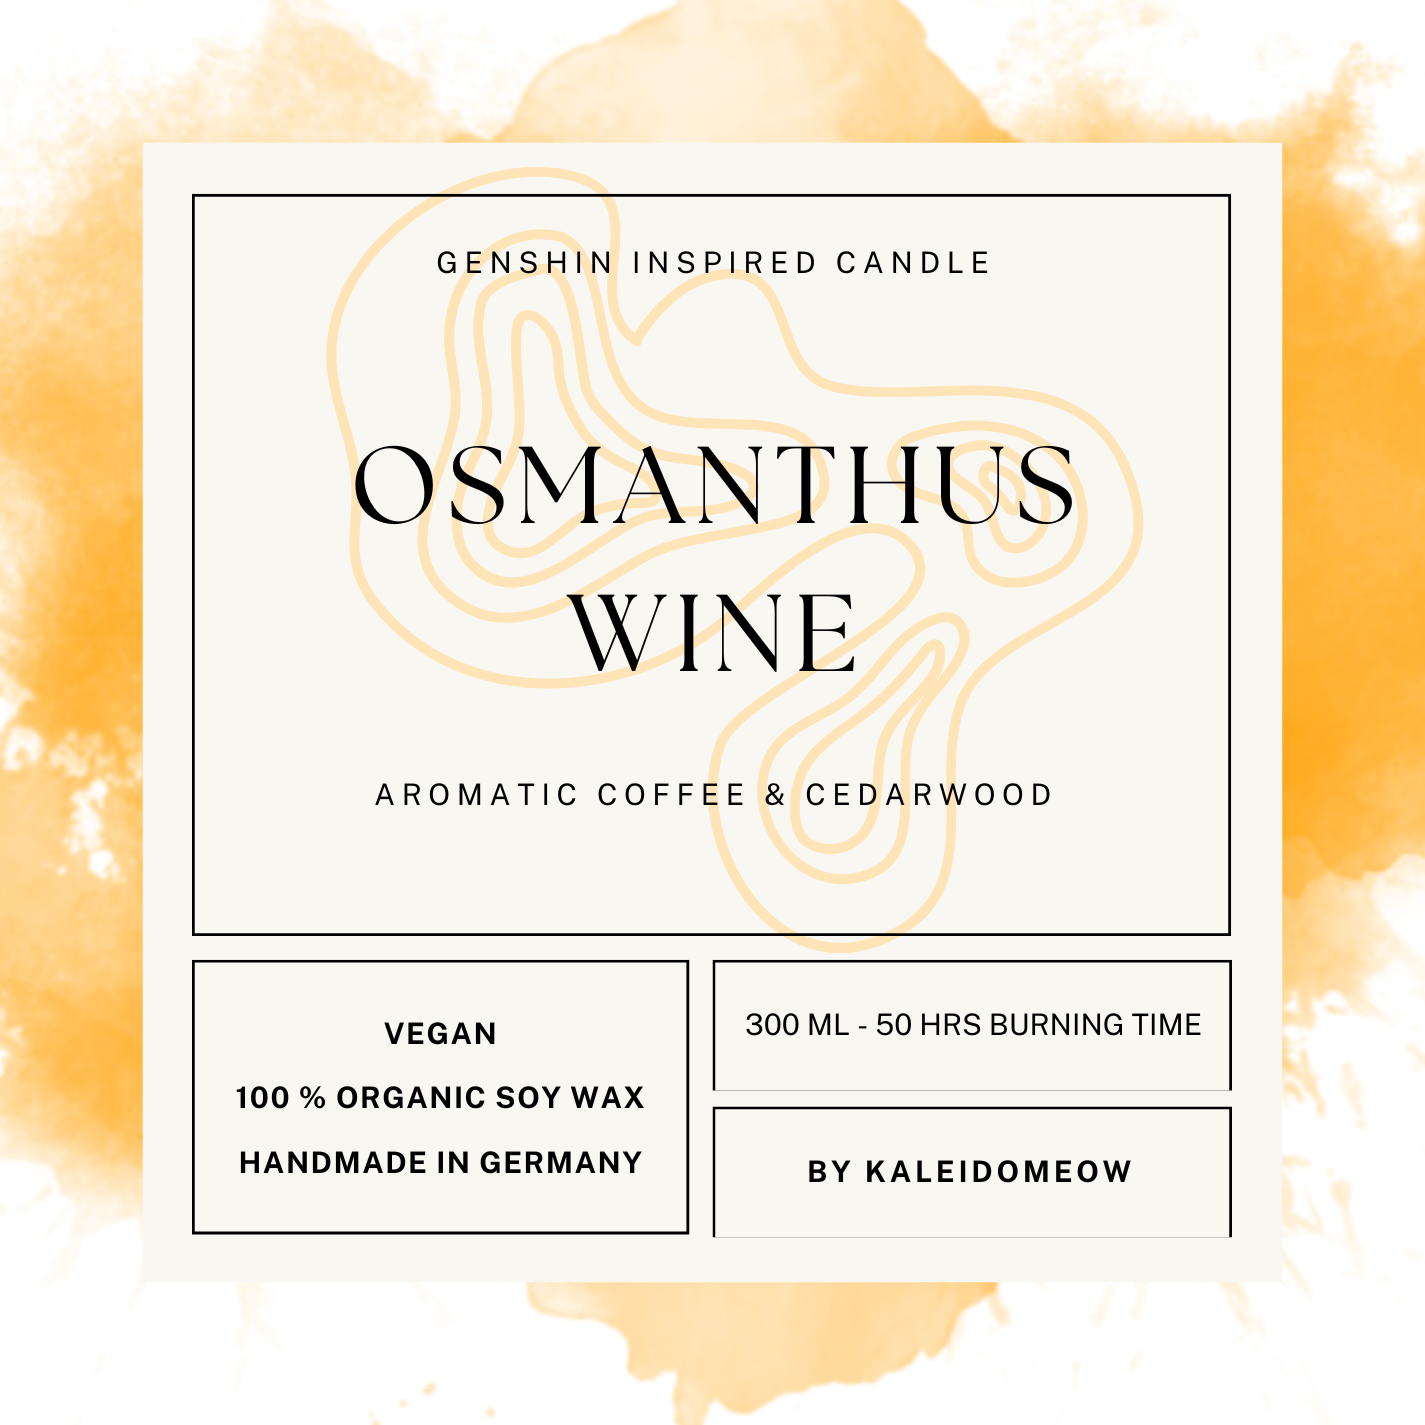 ZHONGLI inspired candle - 'Osmanthus Wine' - Genshin inspired scented candle 300 ML